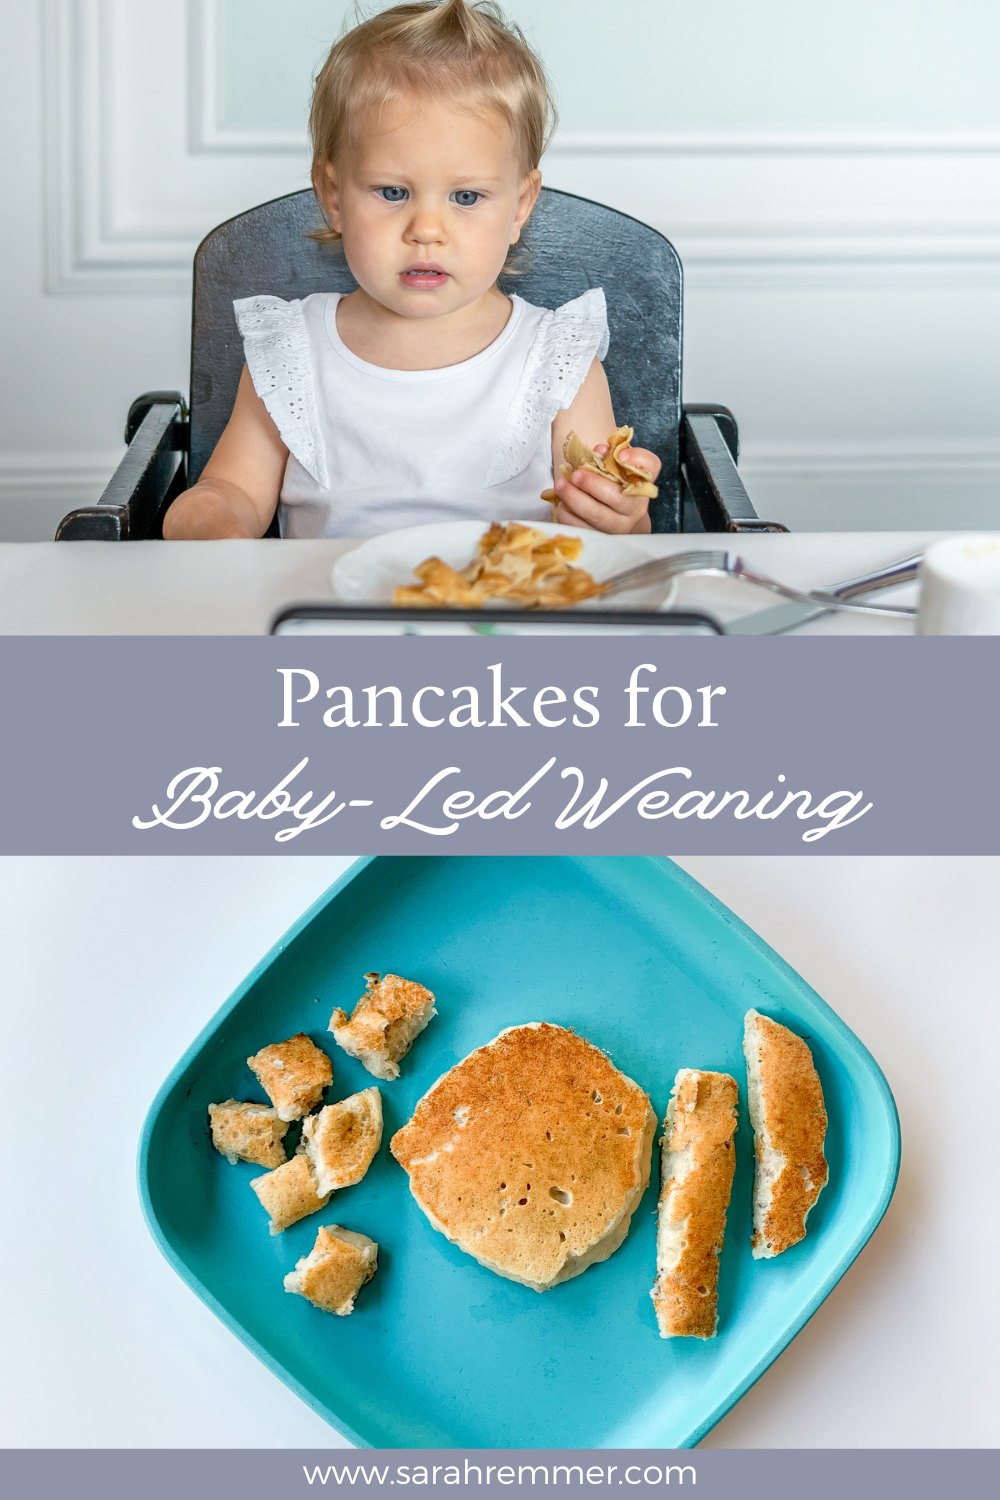 Wondering how and when to introduce pancakes to your baby? Here is everything you need to know about baby-led weaning with pancakes.